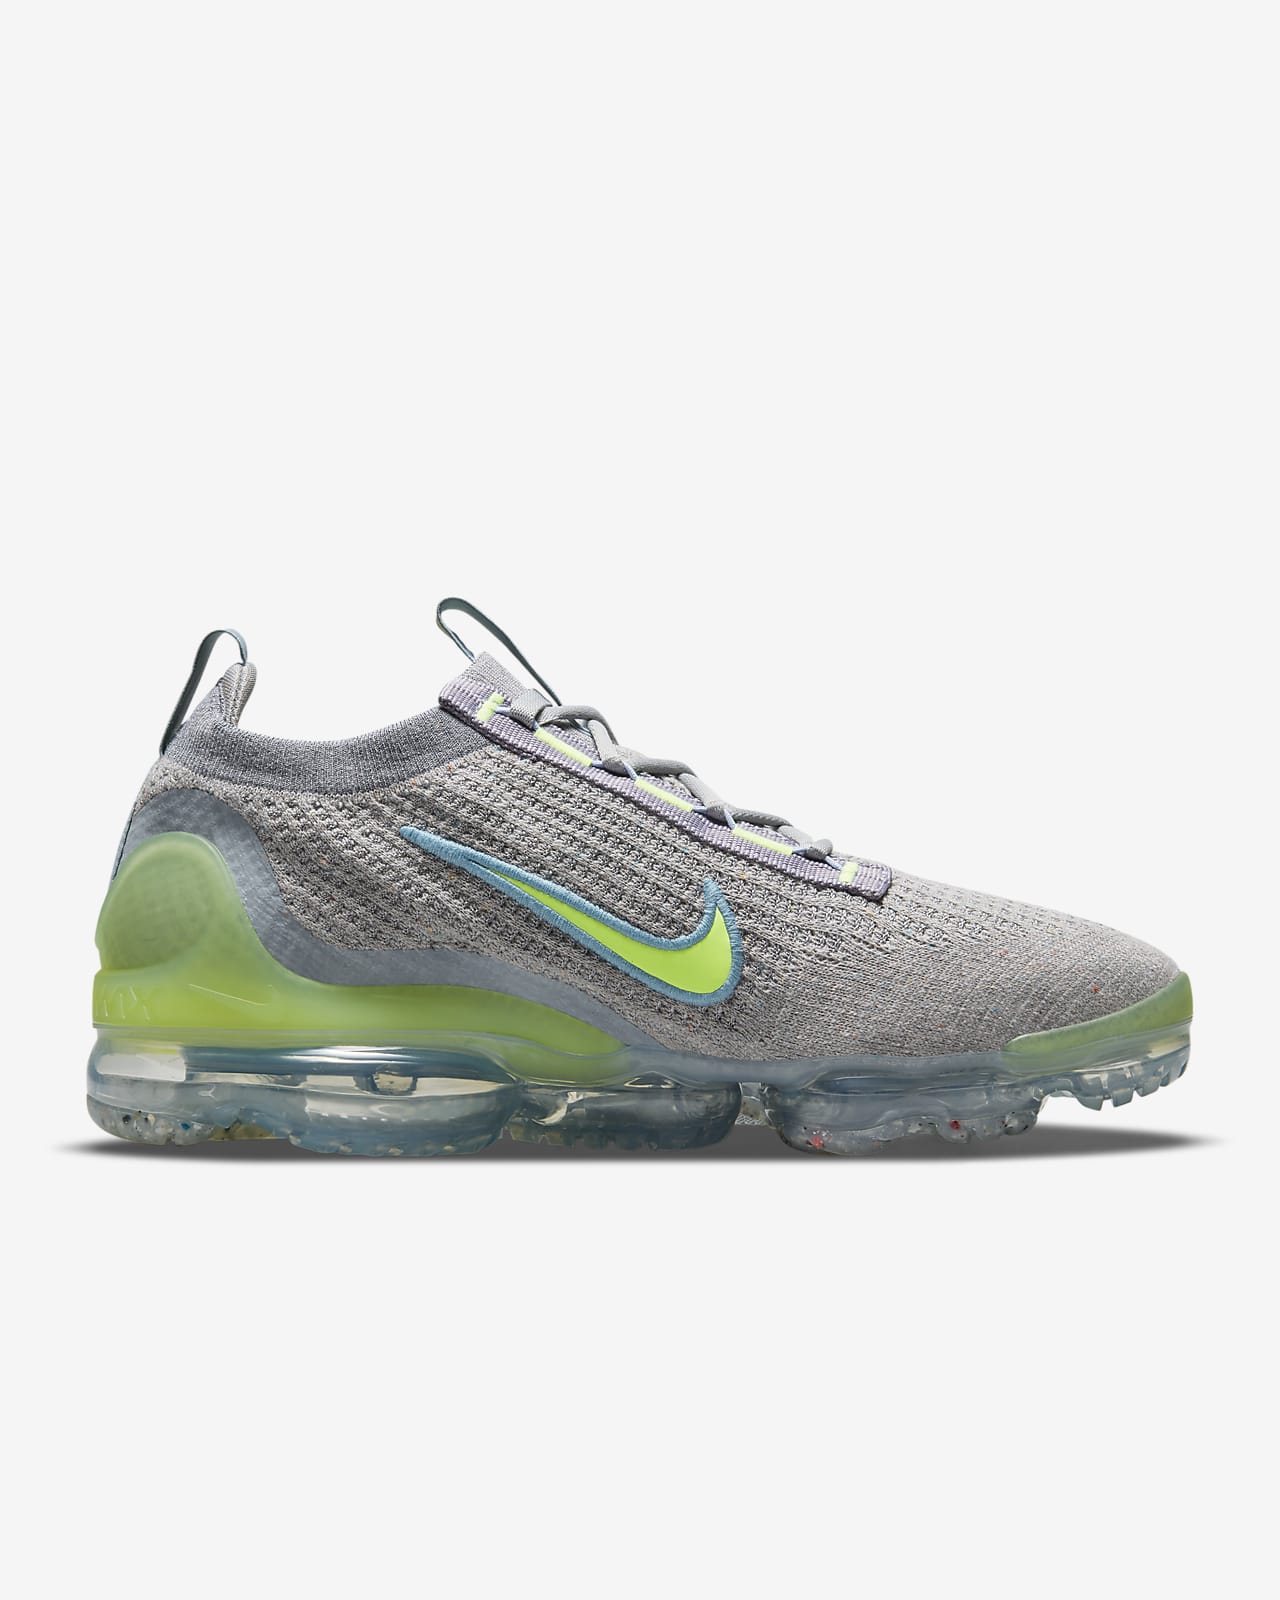 Warlike proposition Bad mood What Is Nike Vapormax Norway, SAVE 46% - aveclumiere.com